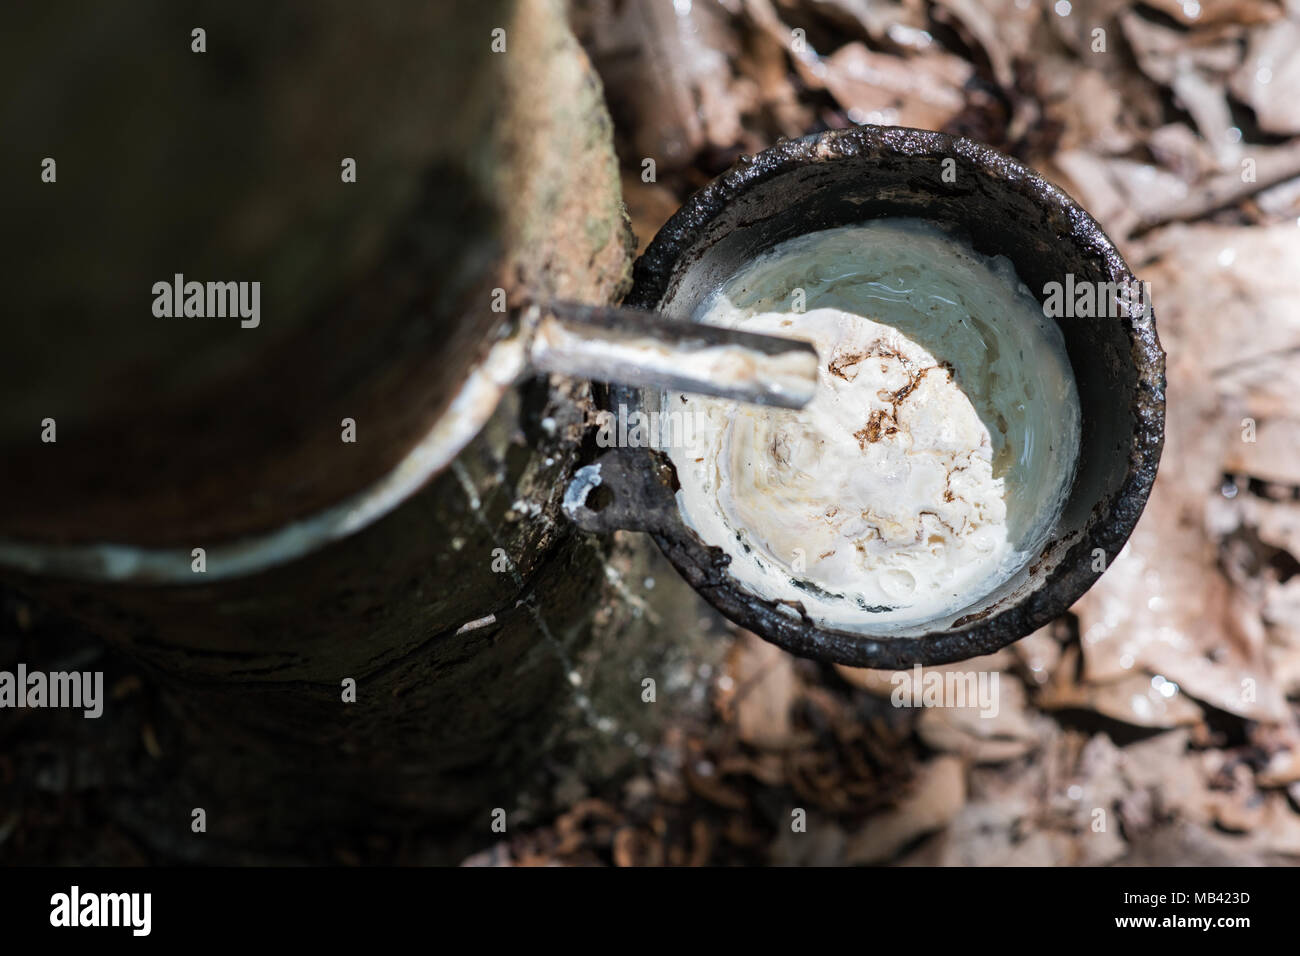 Rubber tree juice collecting on a rubber tree plantation in Nakhon Phanom province, Thailand. The white juice flows into a cup through a cut in bark Stock Photo